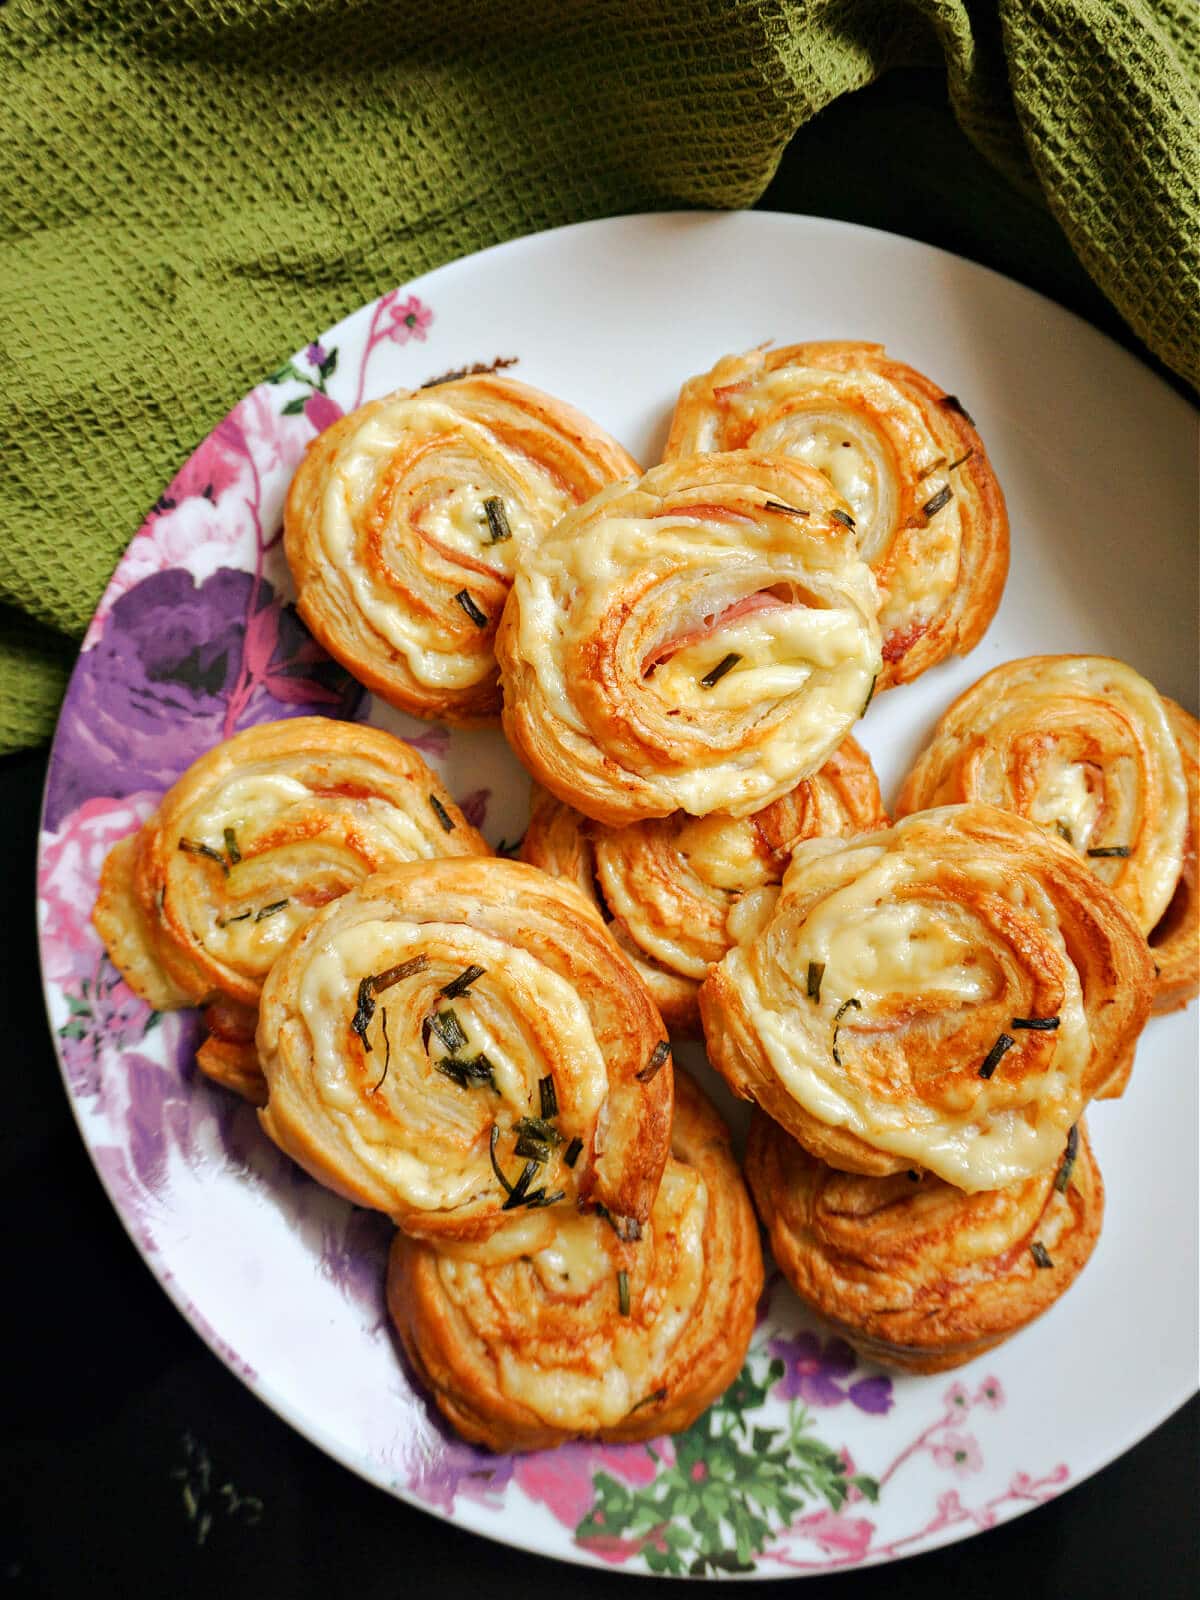 A plate with a pile of pinwheels.